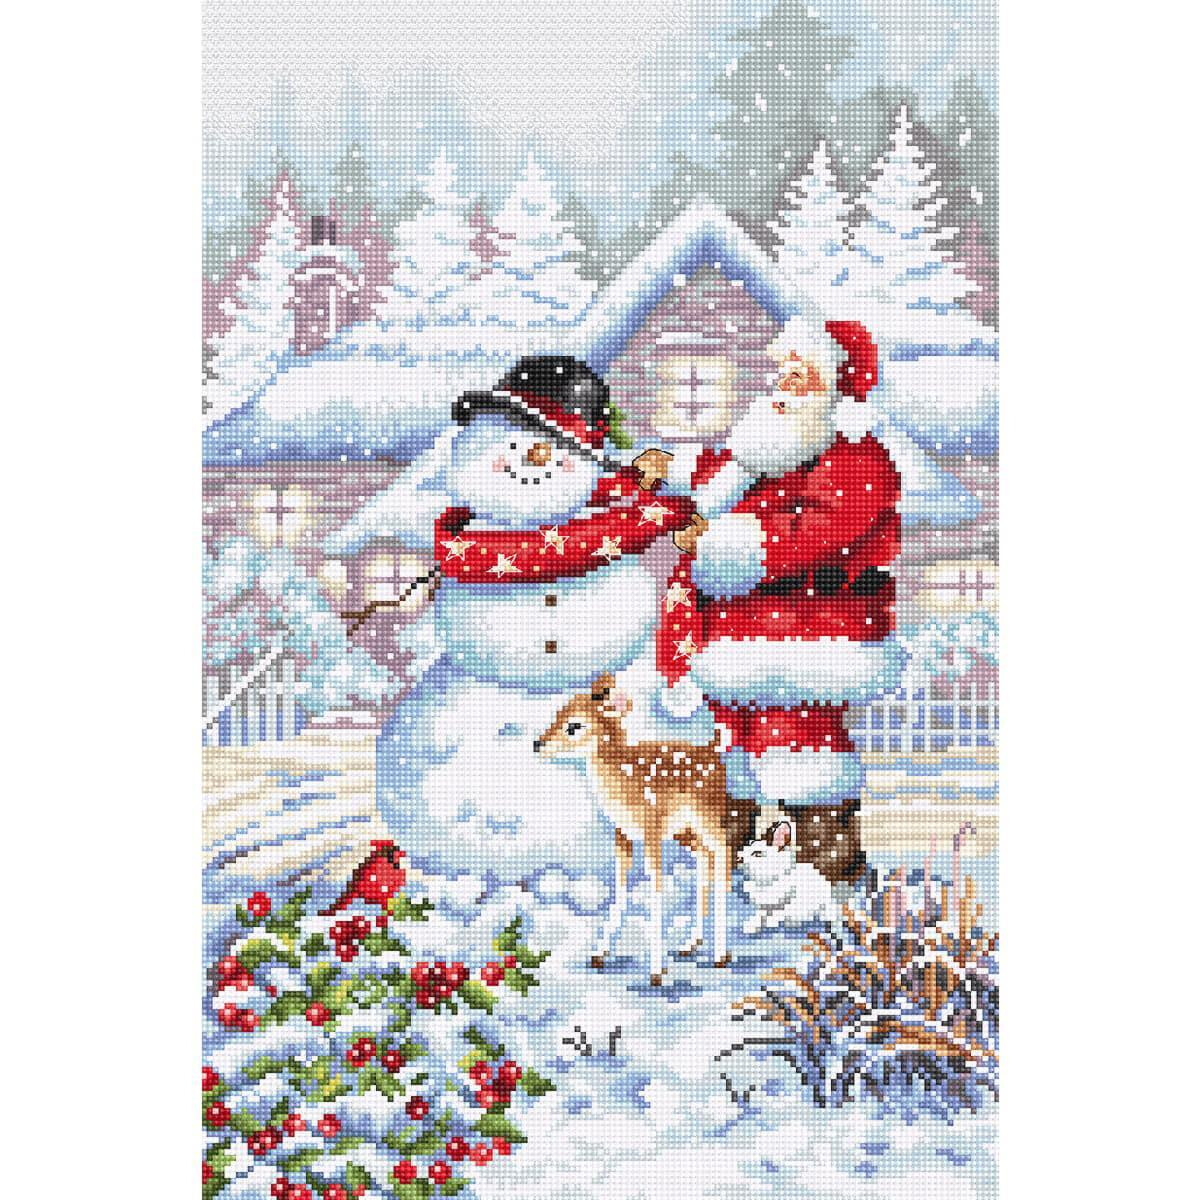 Letistitch counted cross stitch kit "Snowman and...